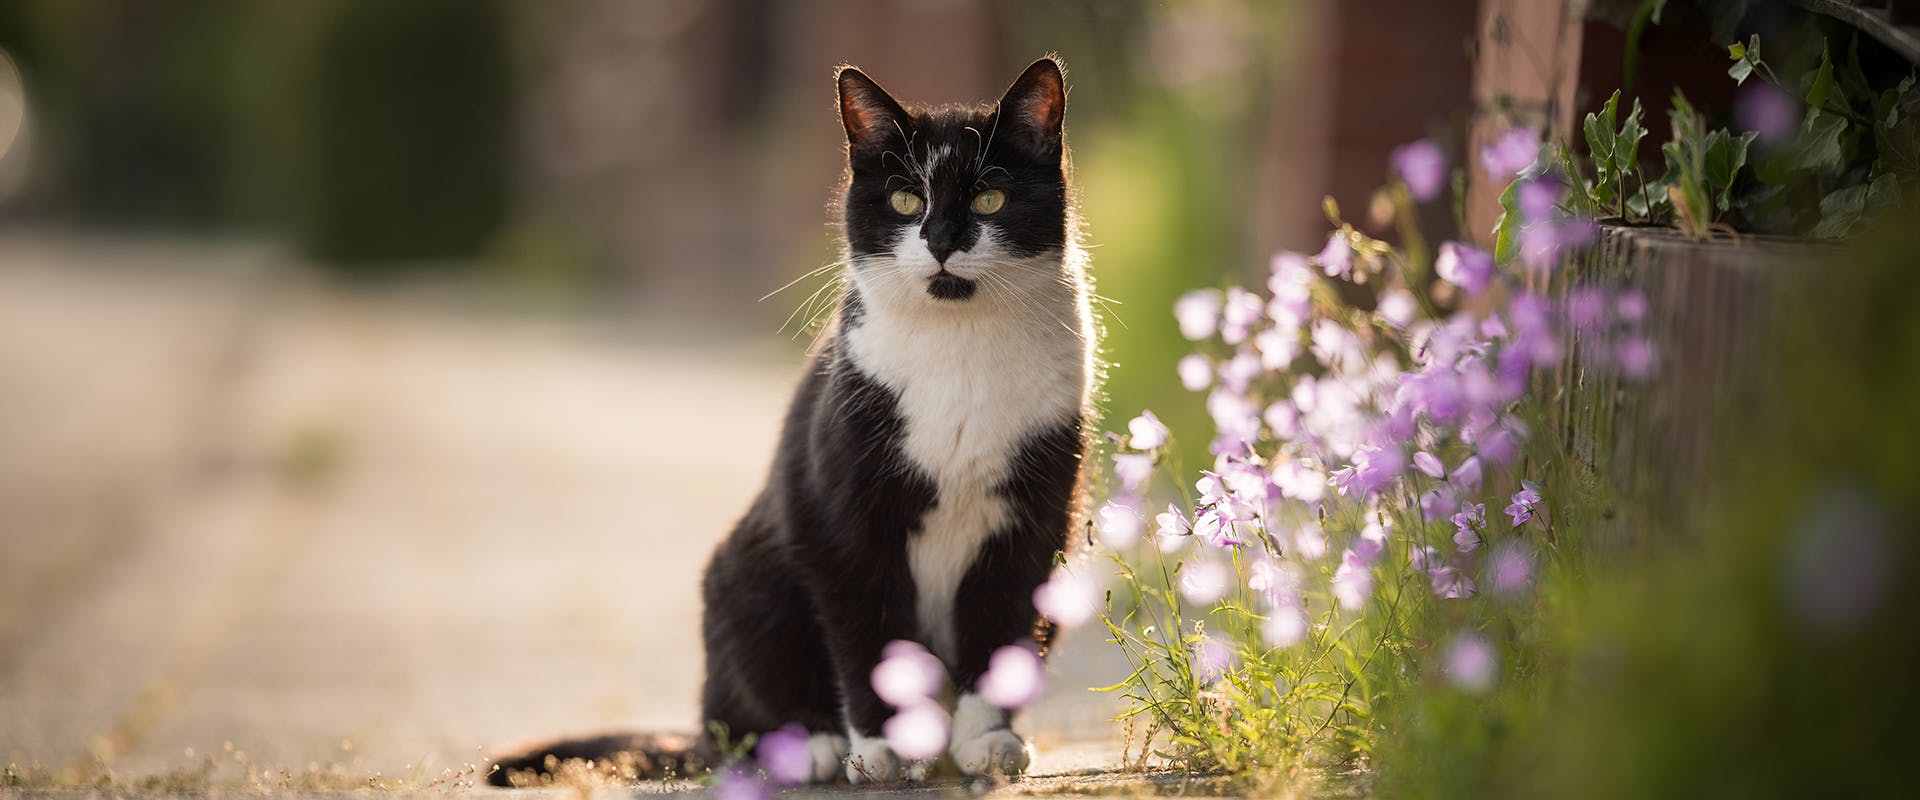 A cat standing next to a bed of flowers